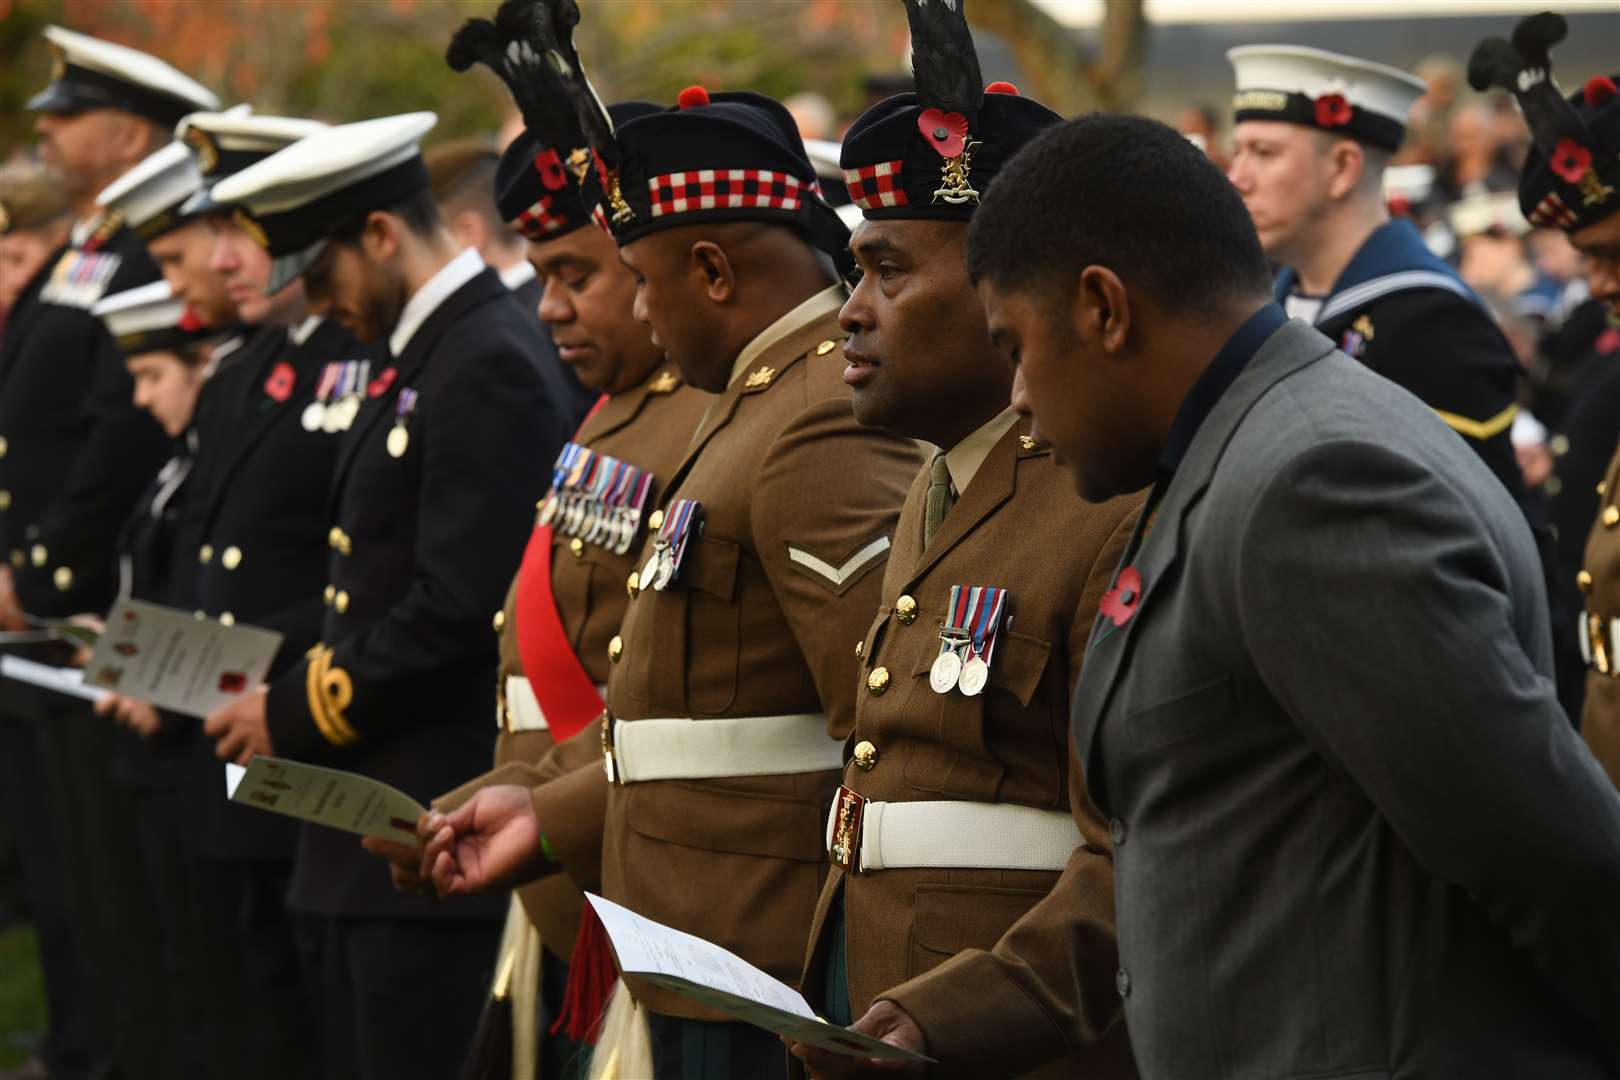 The service at the war memorial included hymns.